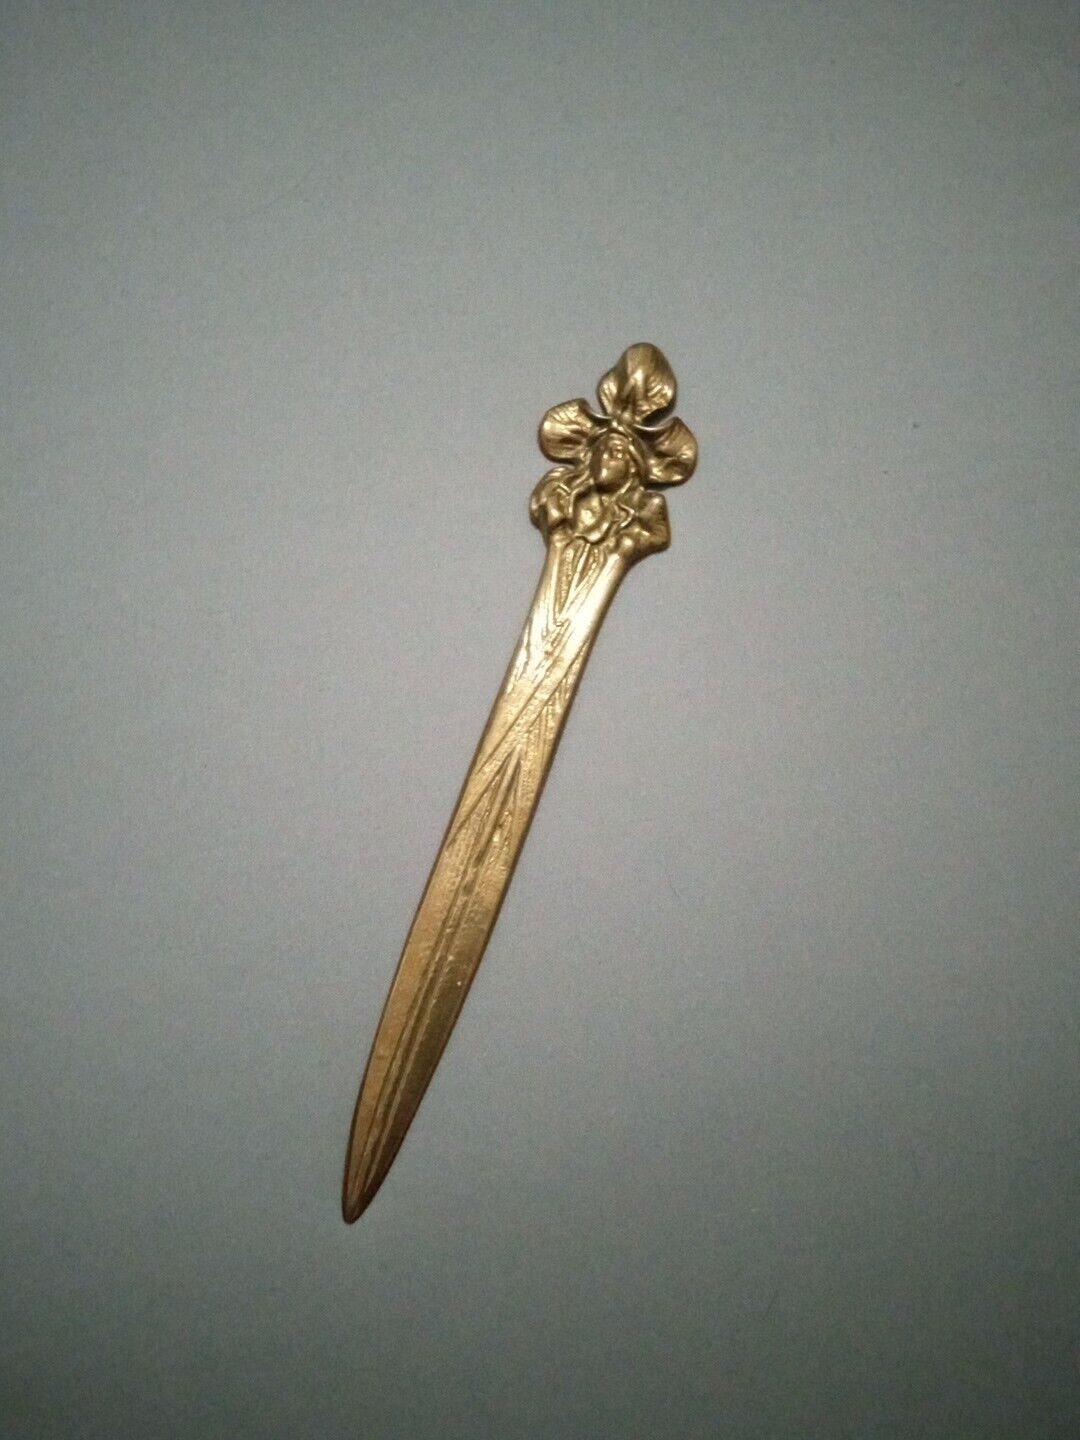 Vintage Solid Brass Decorative Letter Opener Pirate Design Unique Thick Very Htf